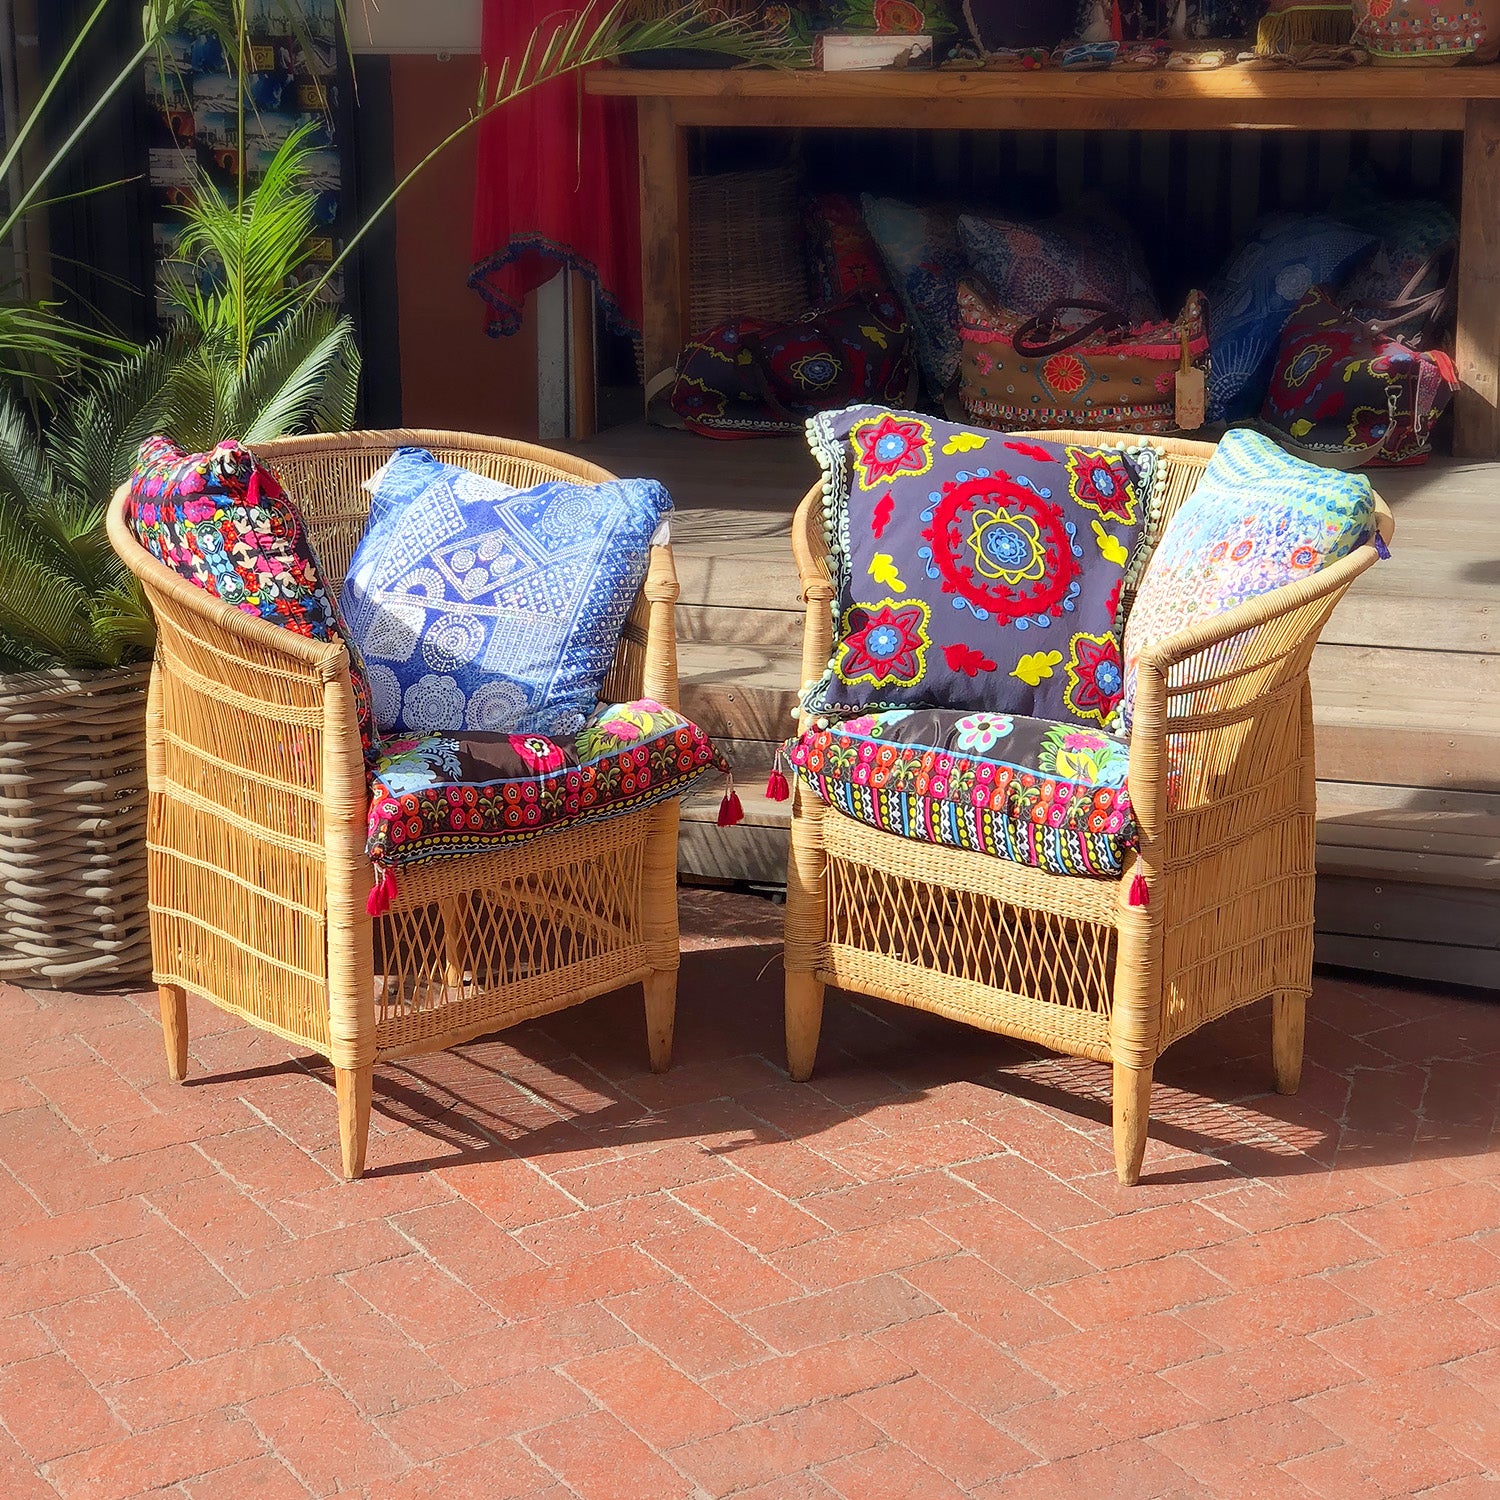 Malawi Furniture Cane Chairs made in Malawi, Hand-woven. wood